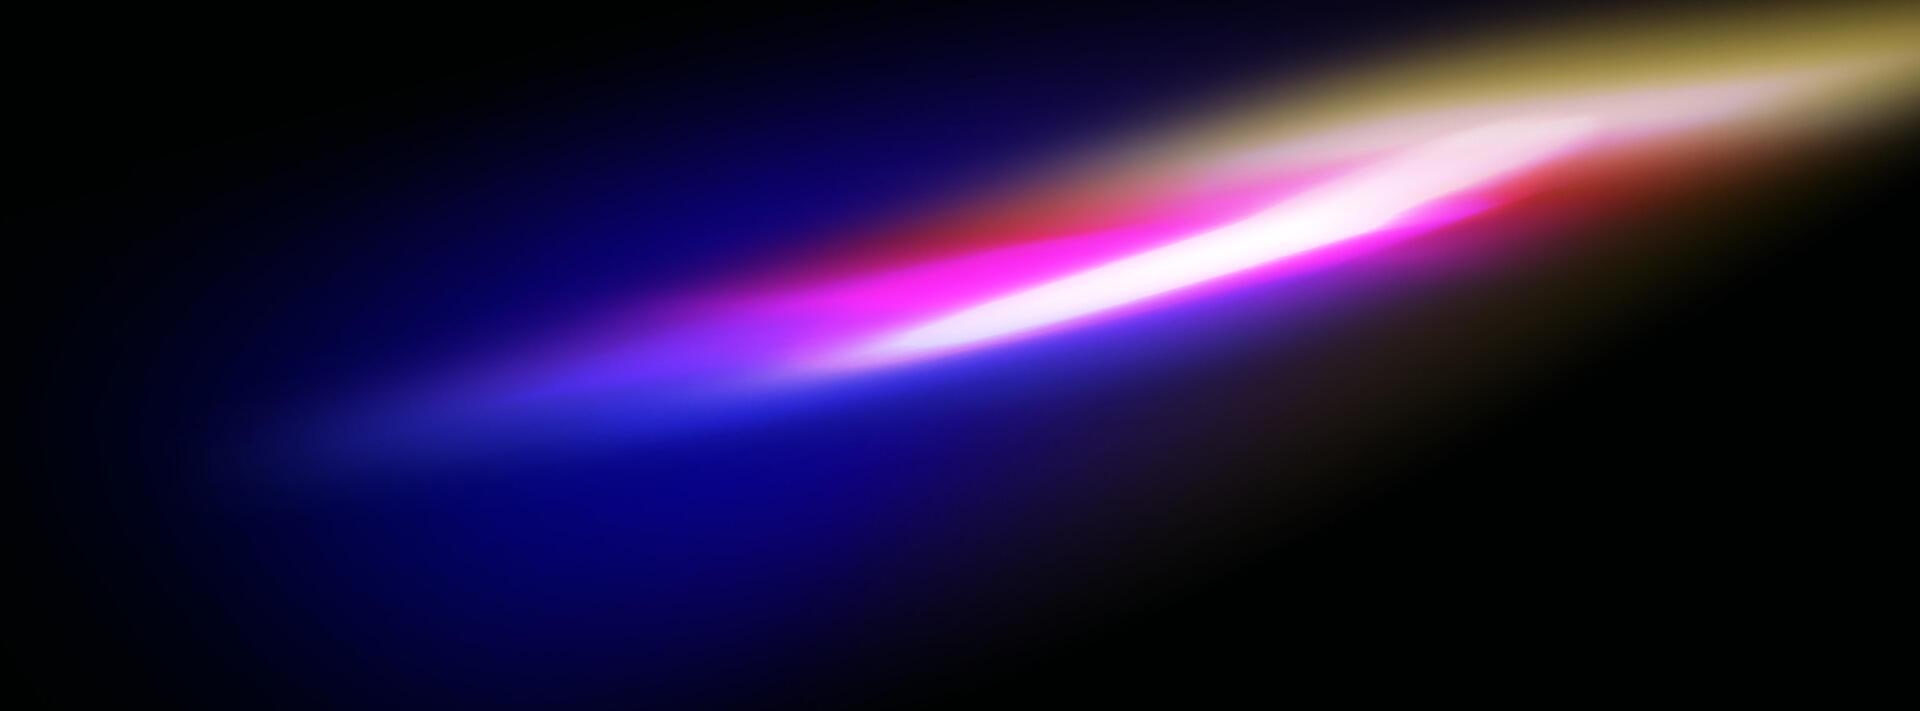 A set of colourful vector lens, crystal rainbow  light  and  flare transparent effects.Overlay for backgrounds.